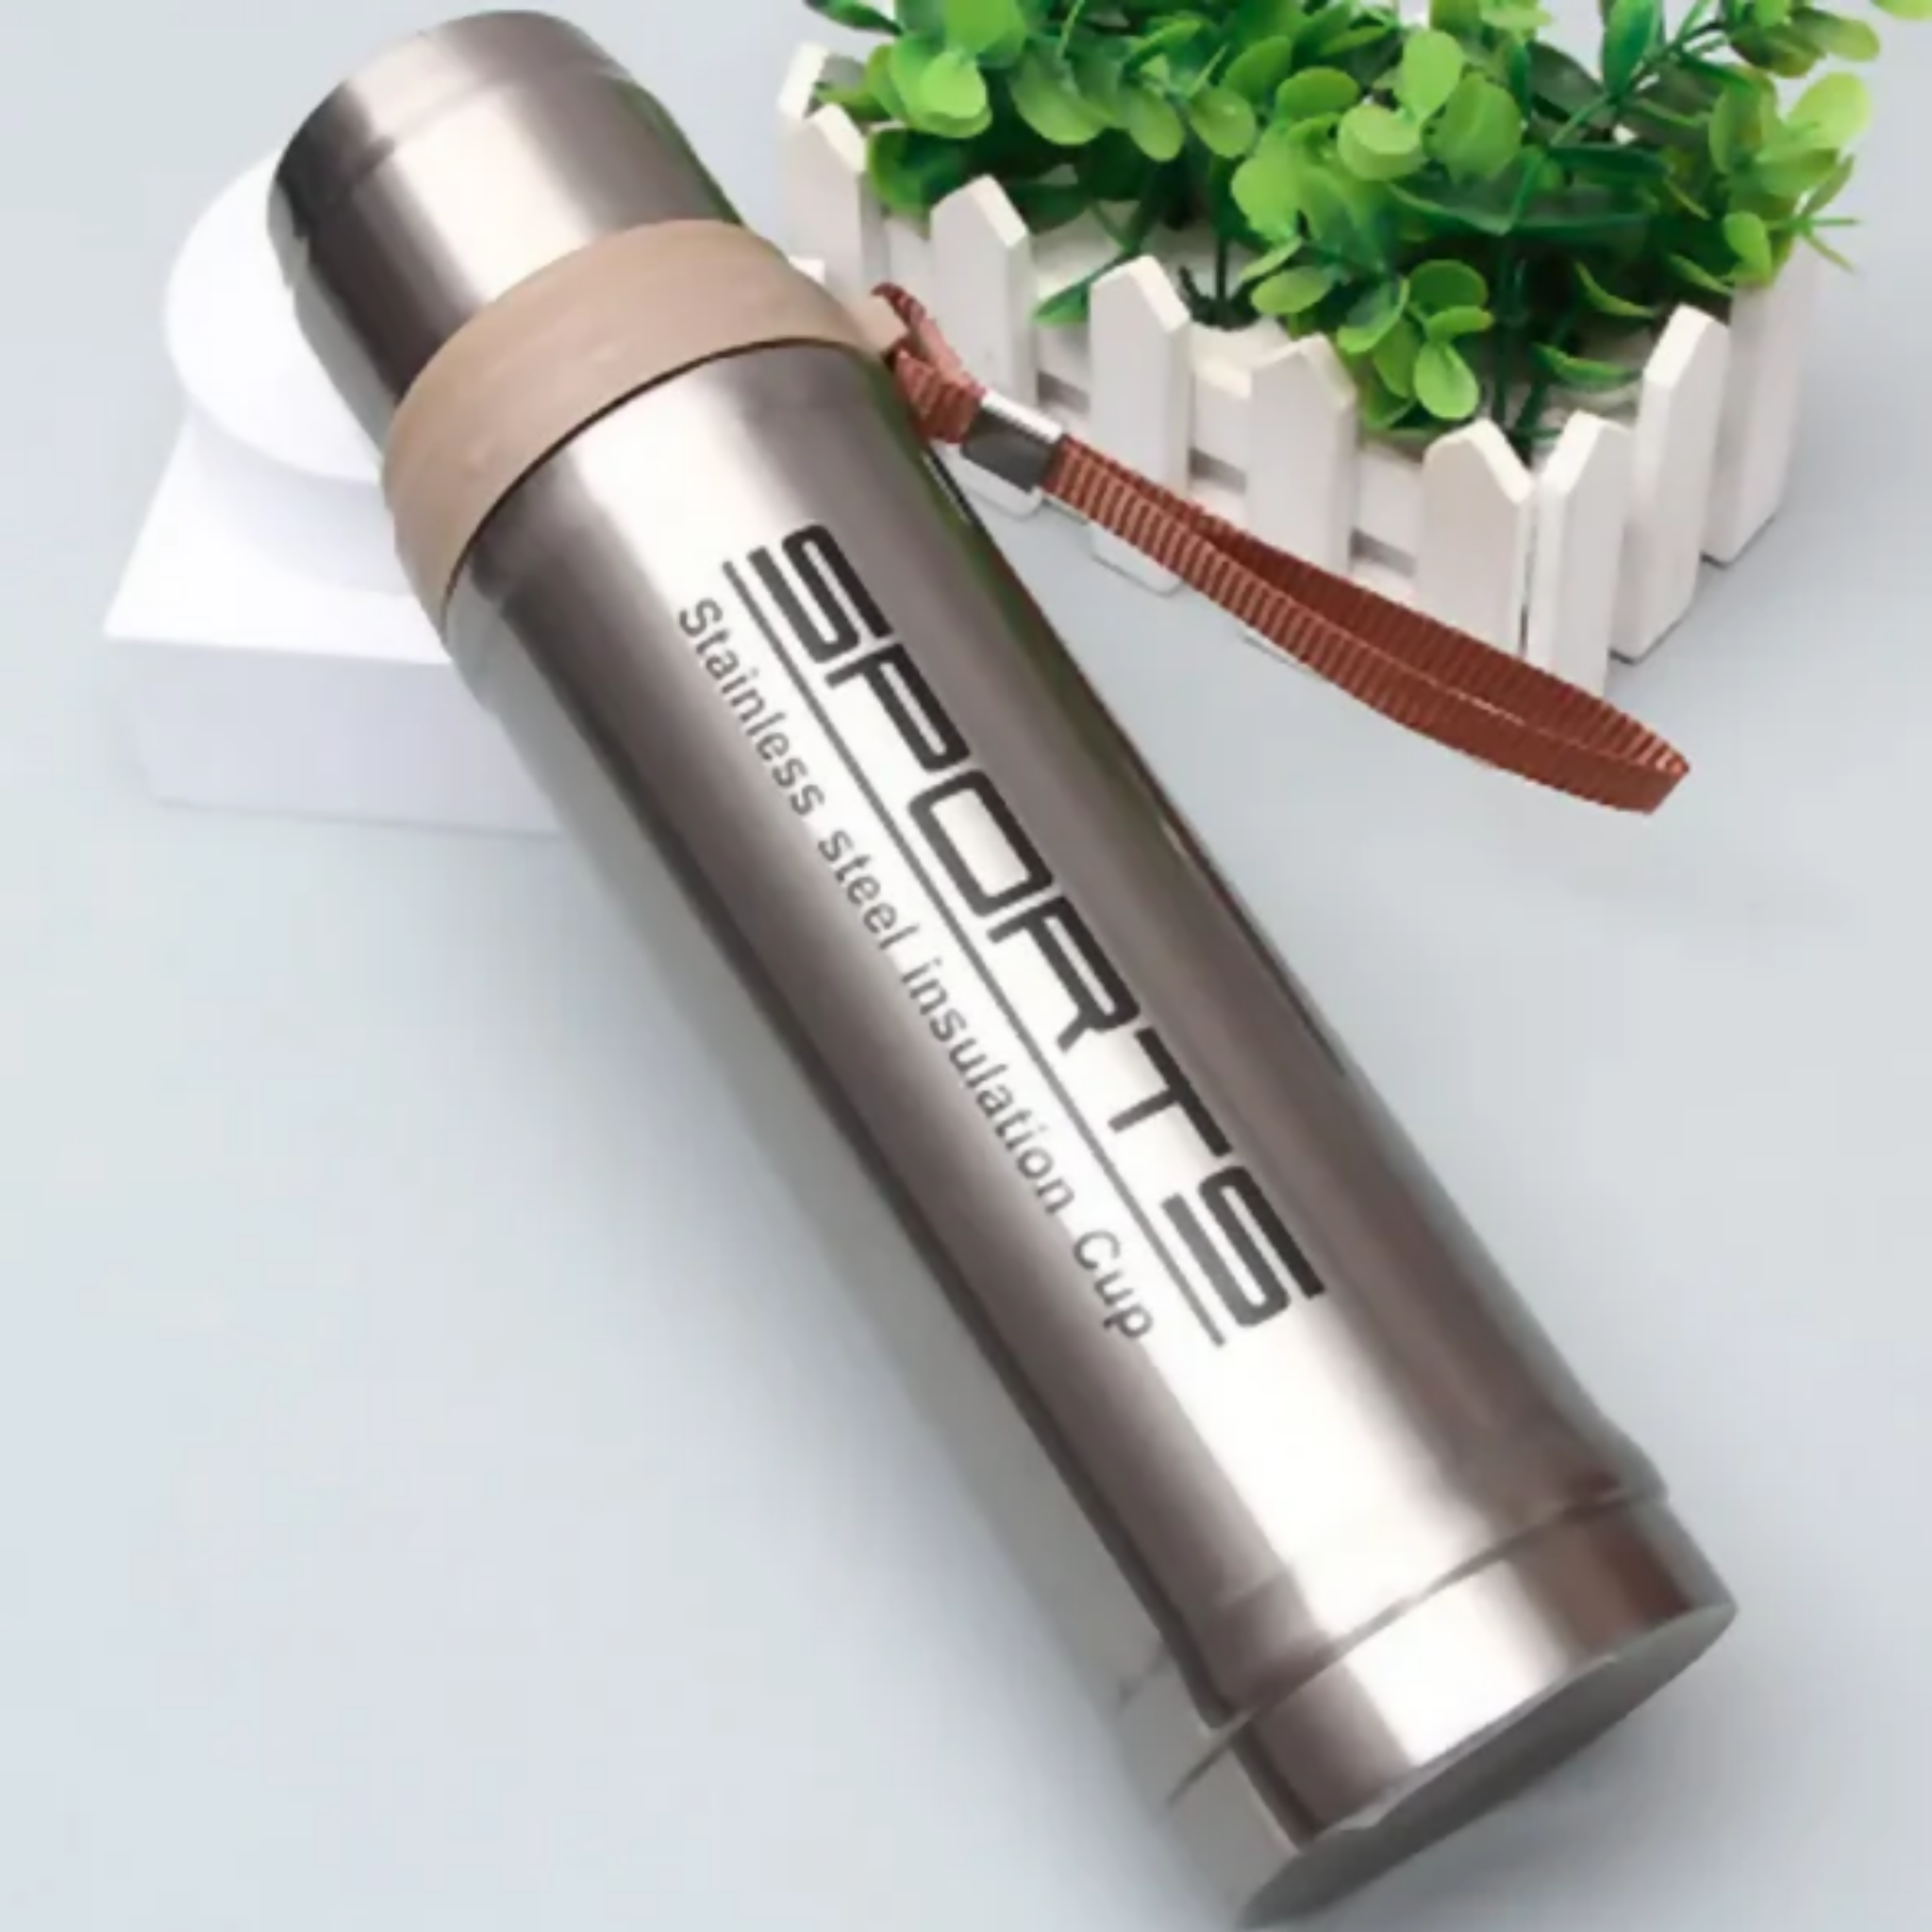 Sports Water Bottle, Durable 750ml Stainless Steel with Vacuum Flask Technology